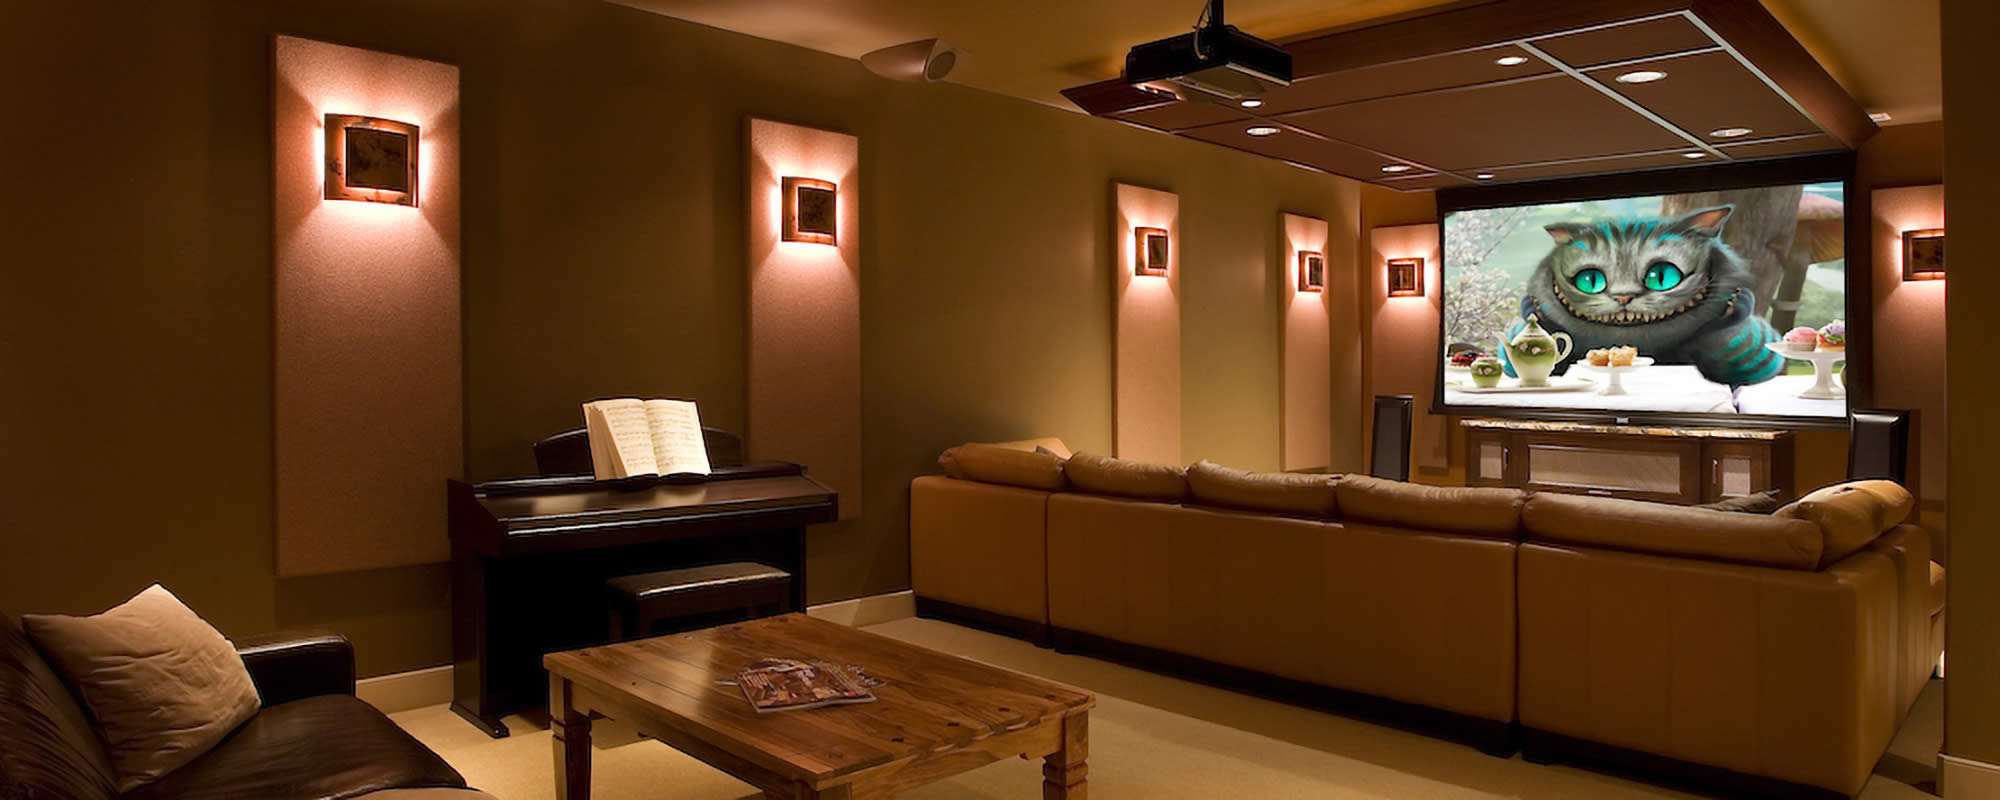 Home Theater, A/V System, Acoustic Treatments, Home Automation